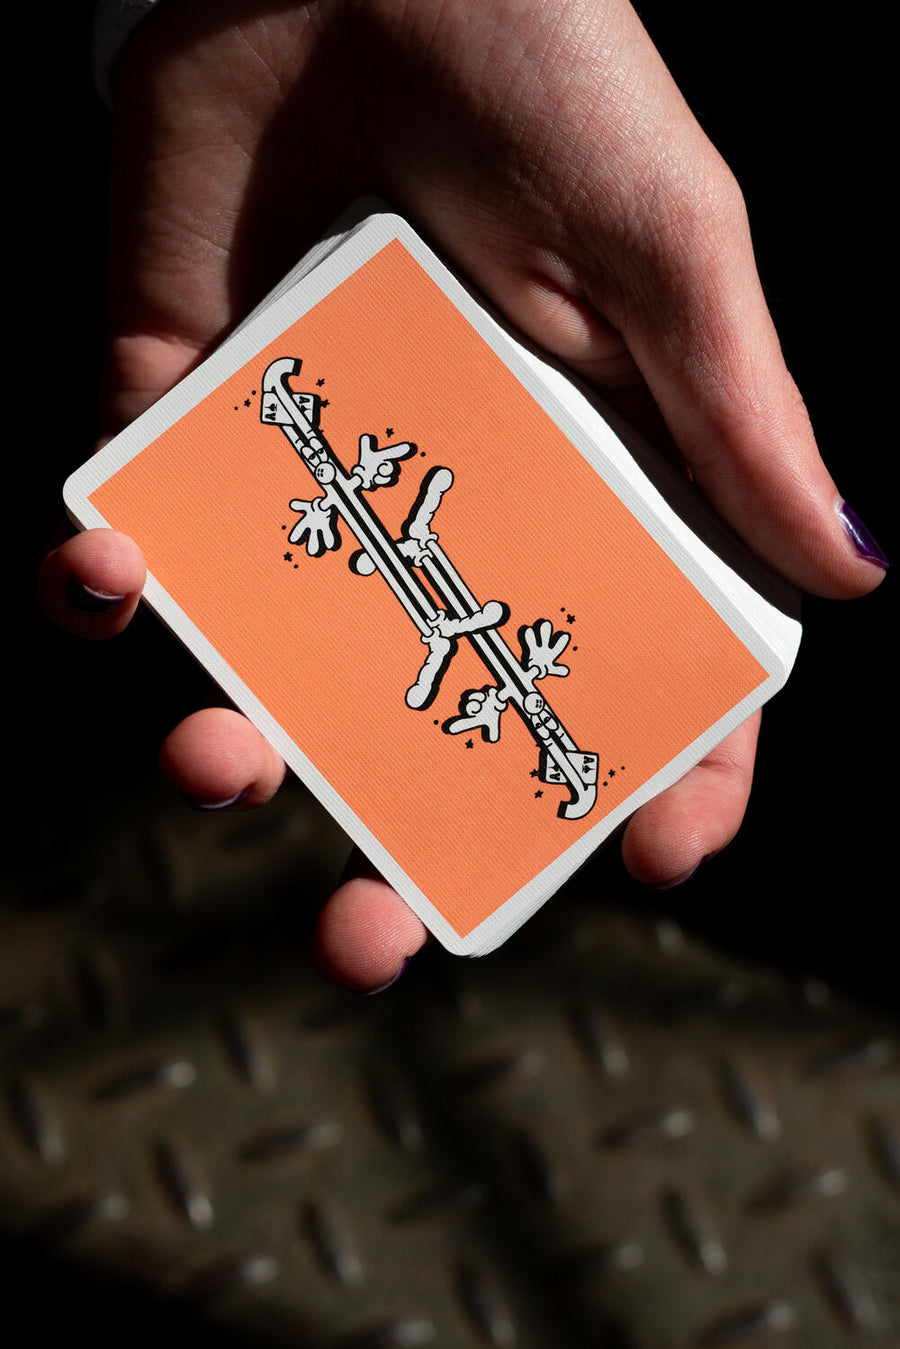 Good Company V2 Fontaine Playing Cards